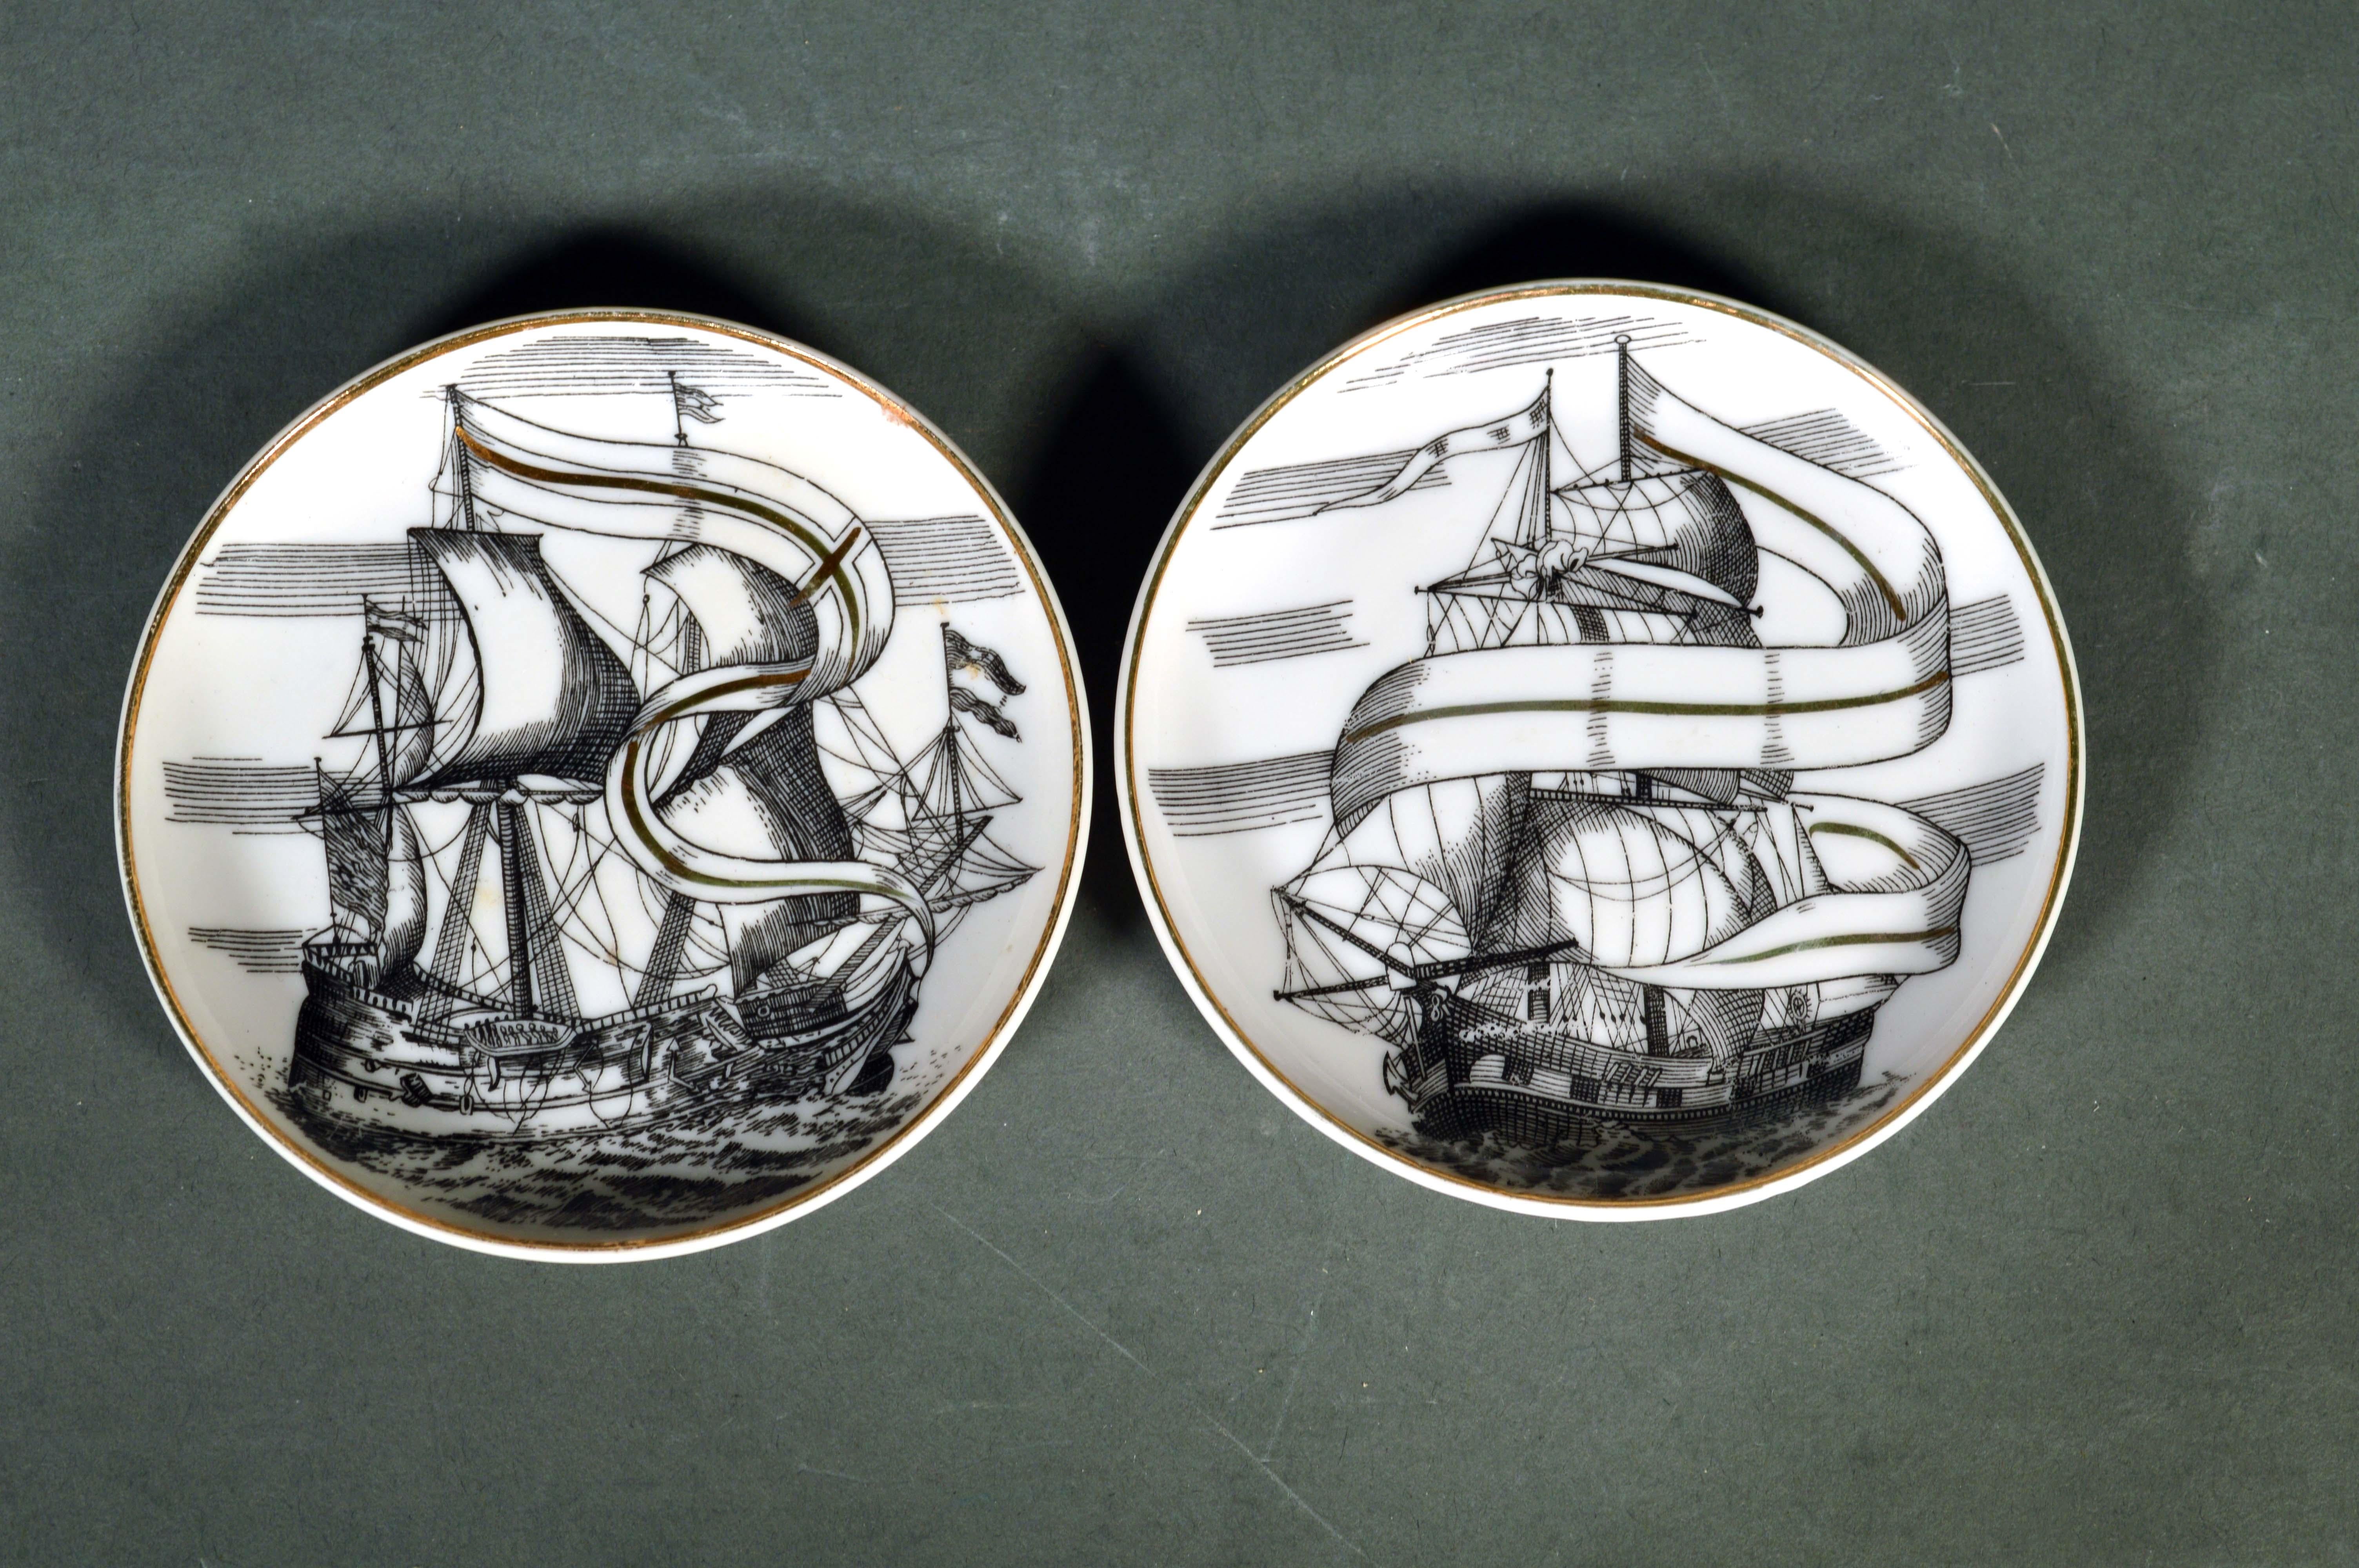 Porcelain MCM Fornasetti-Style Coasters Tall Ships with Original Box, Velieri Pattern